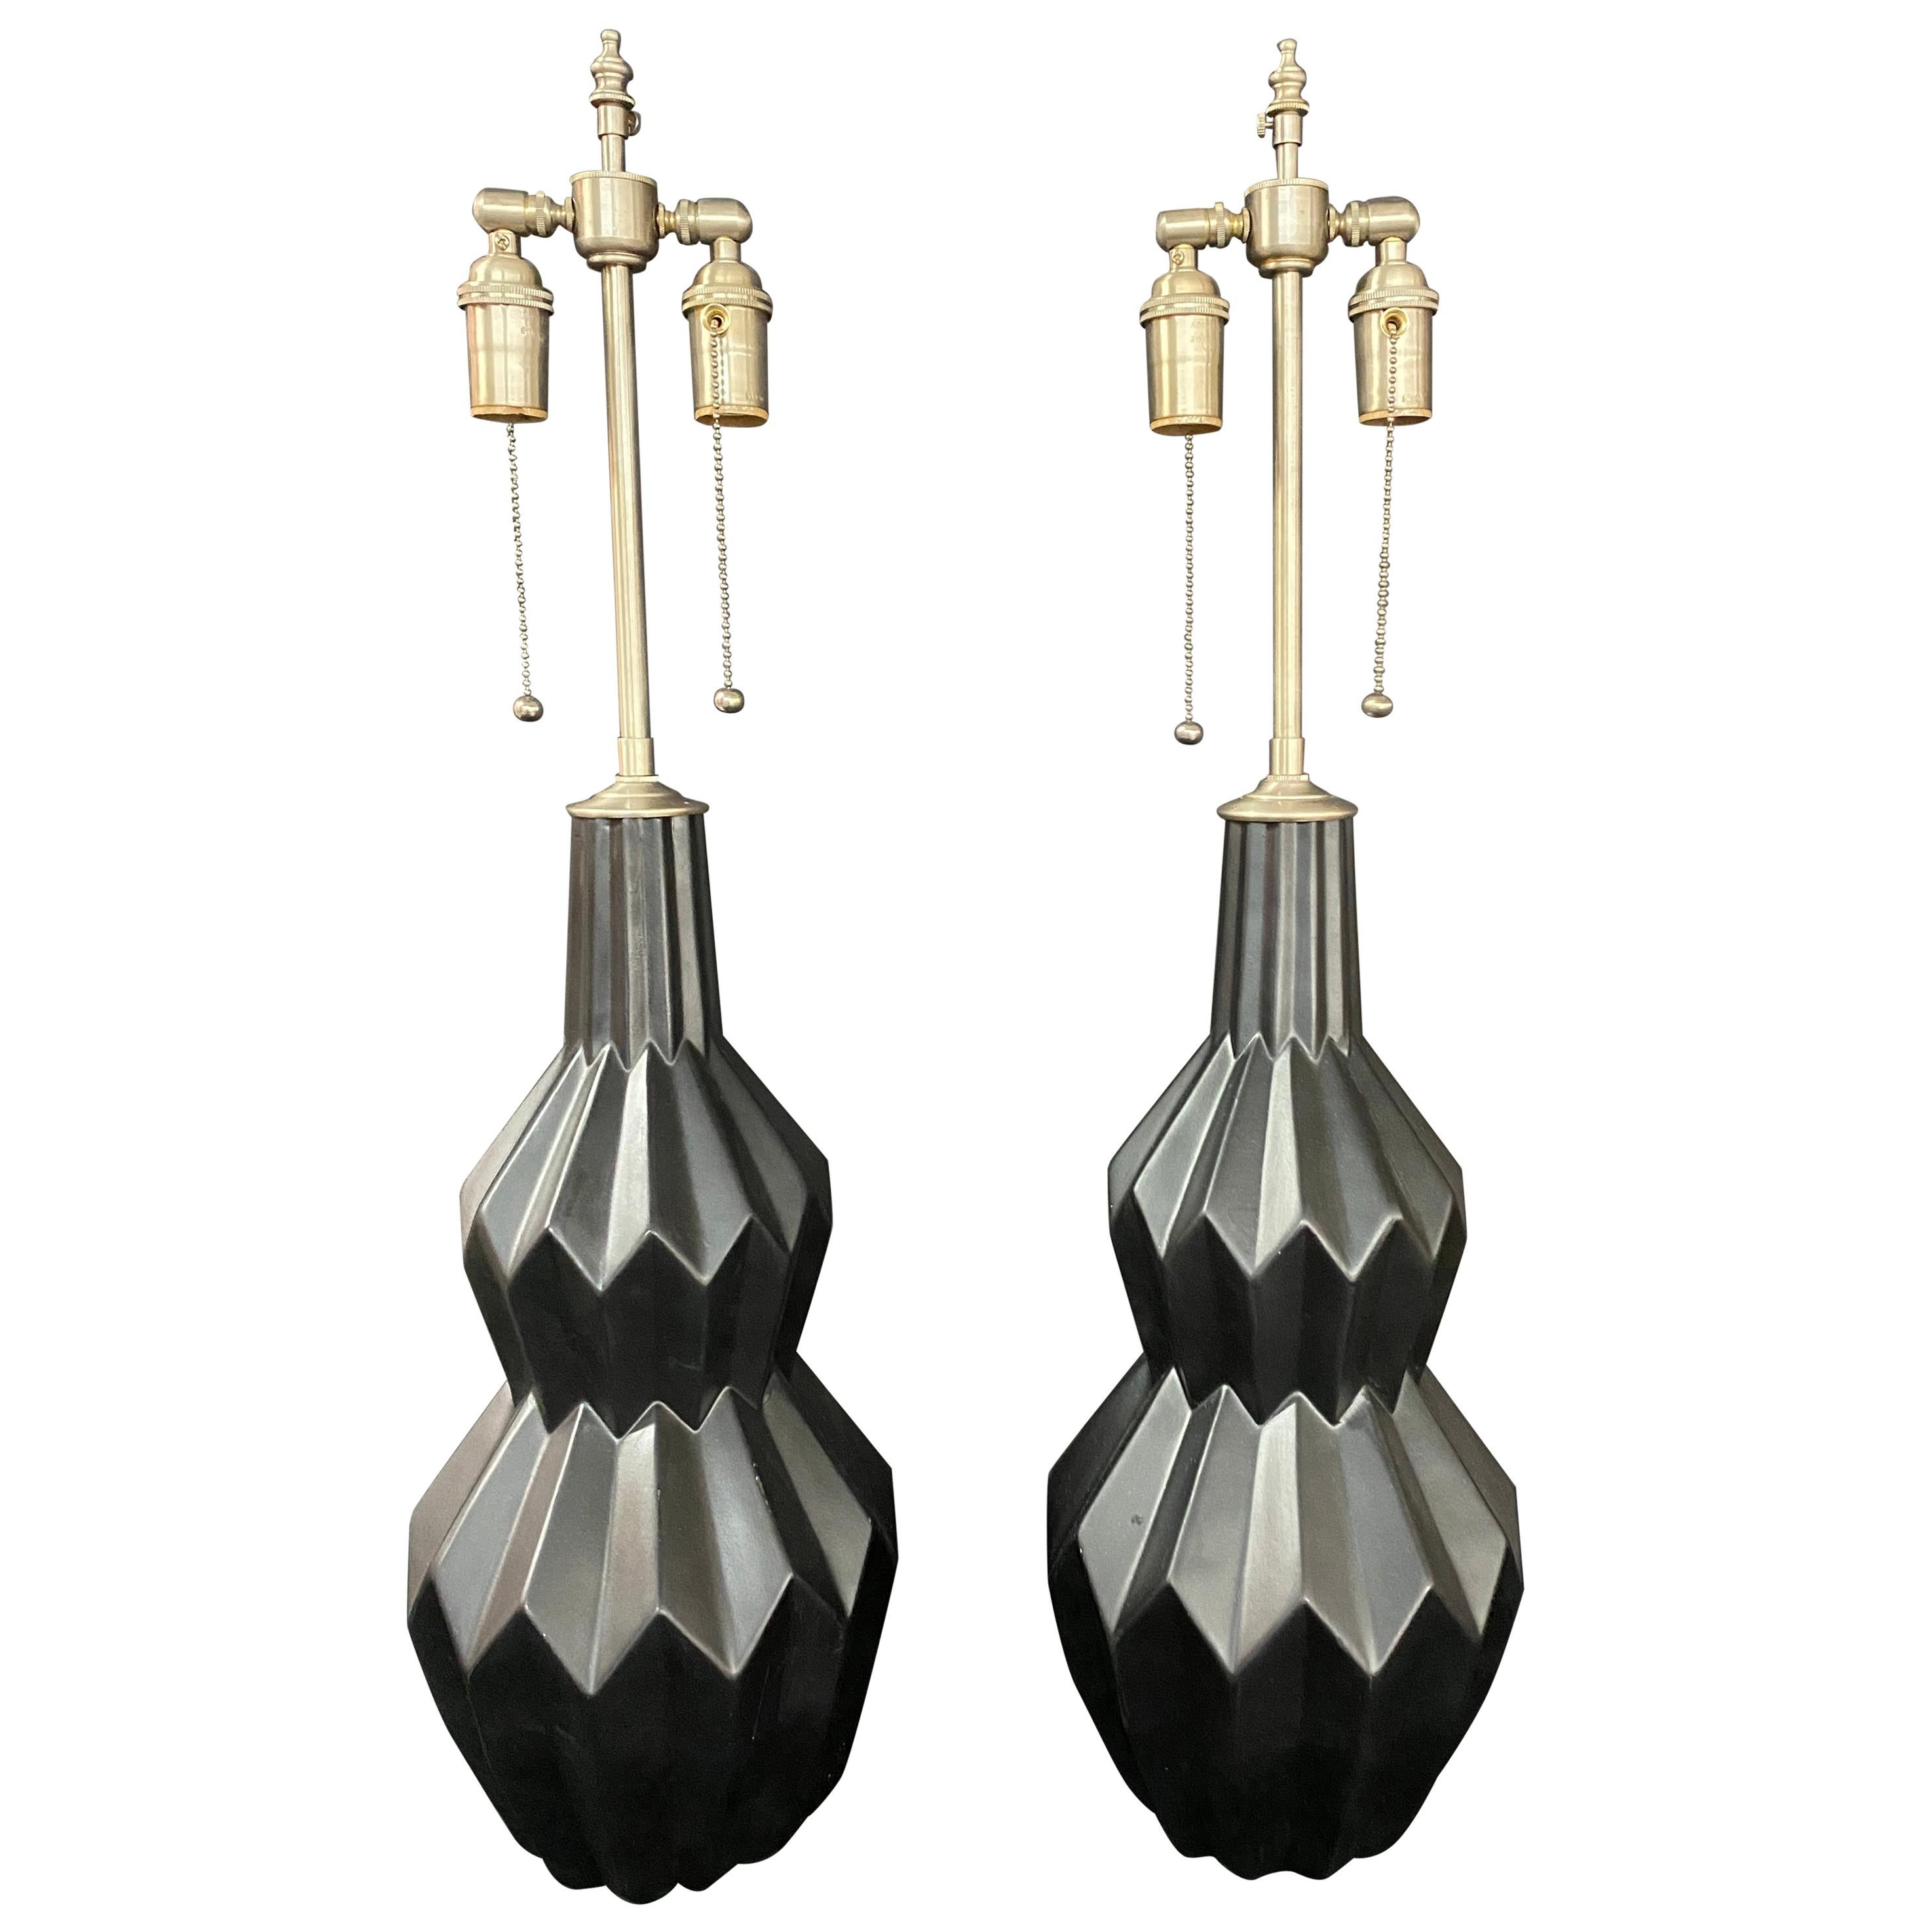 Pair of Black Charcoal Matte Diamond Shaped Table Lamps